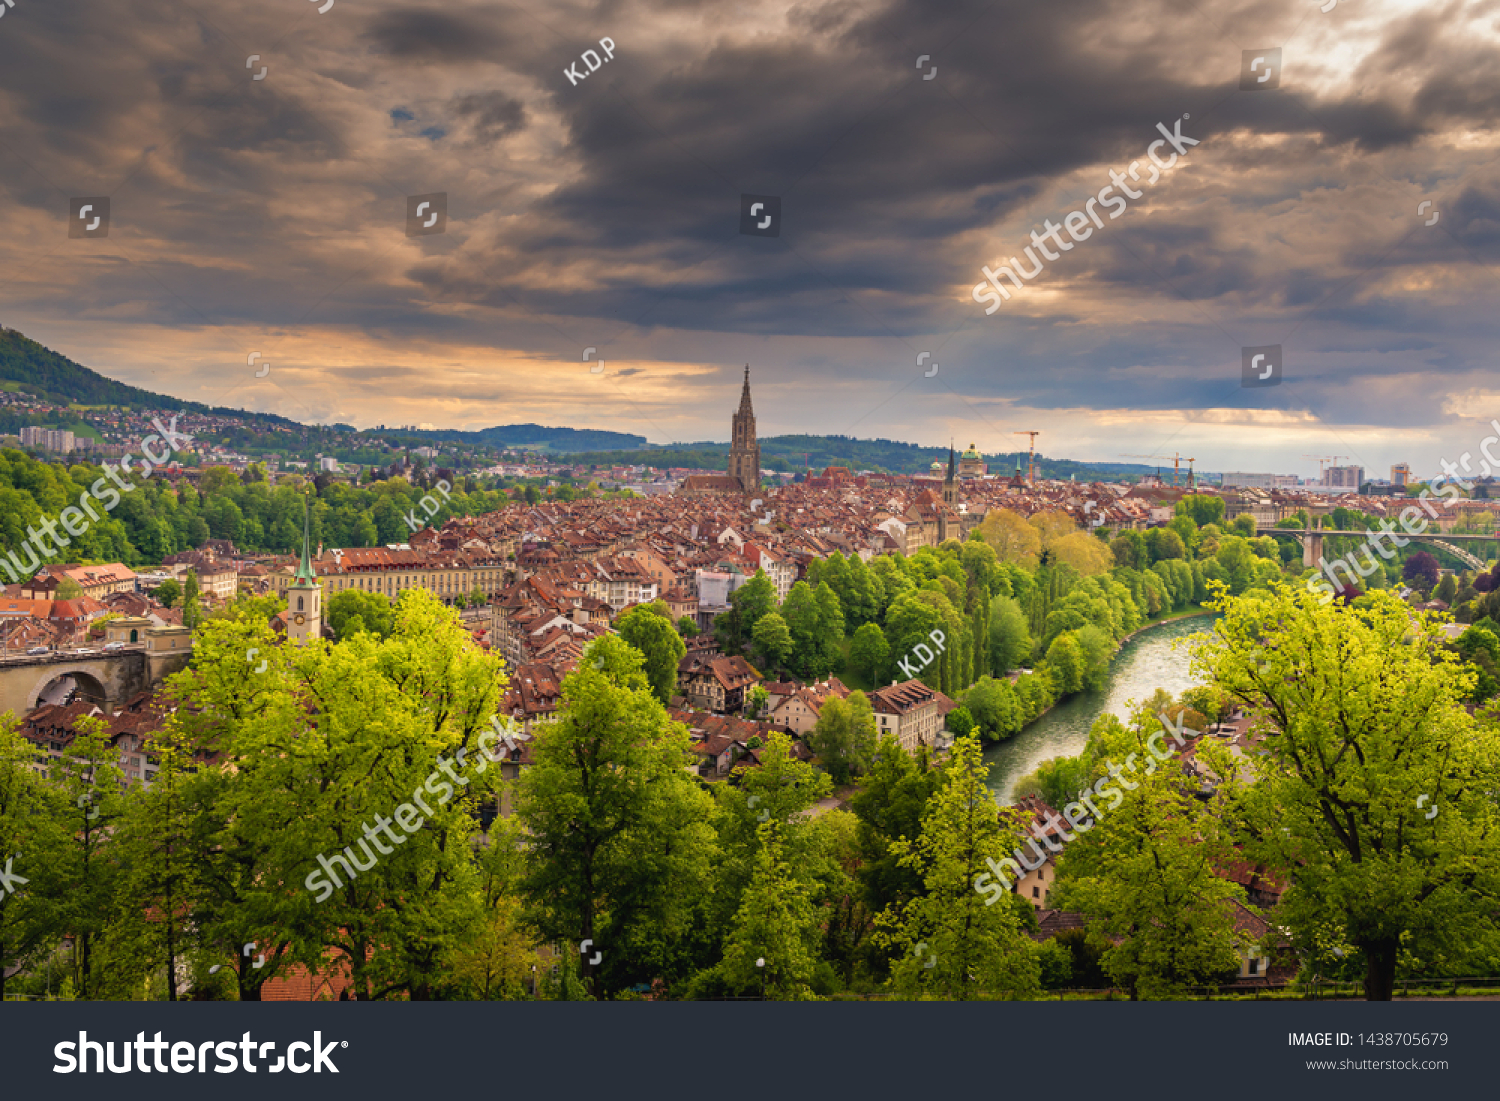 Cityscape Capital City of Bern, Switzerland, Panoramic Scenery Old Town City View and Swiss Architectural Historical Building in Bern. Architecture Housing and Residential at Sunset Scene of Berne #1438705679